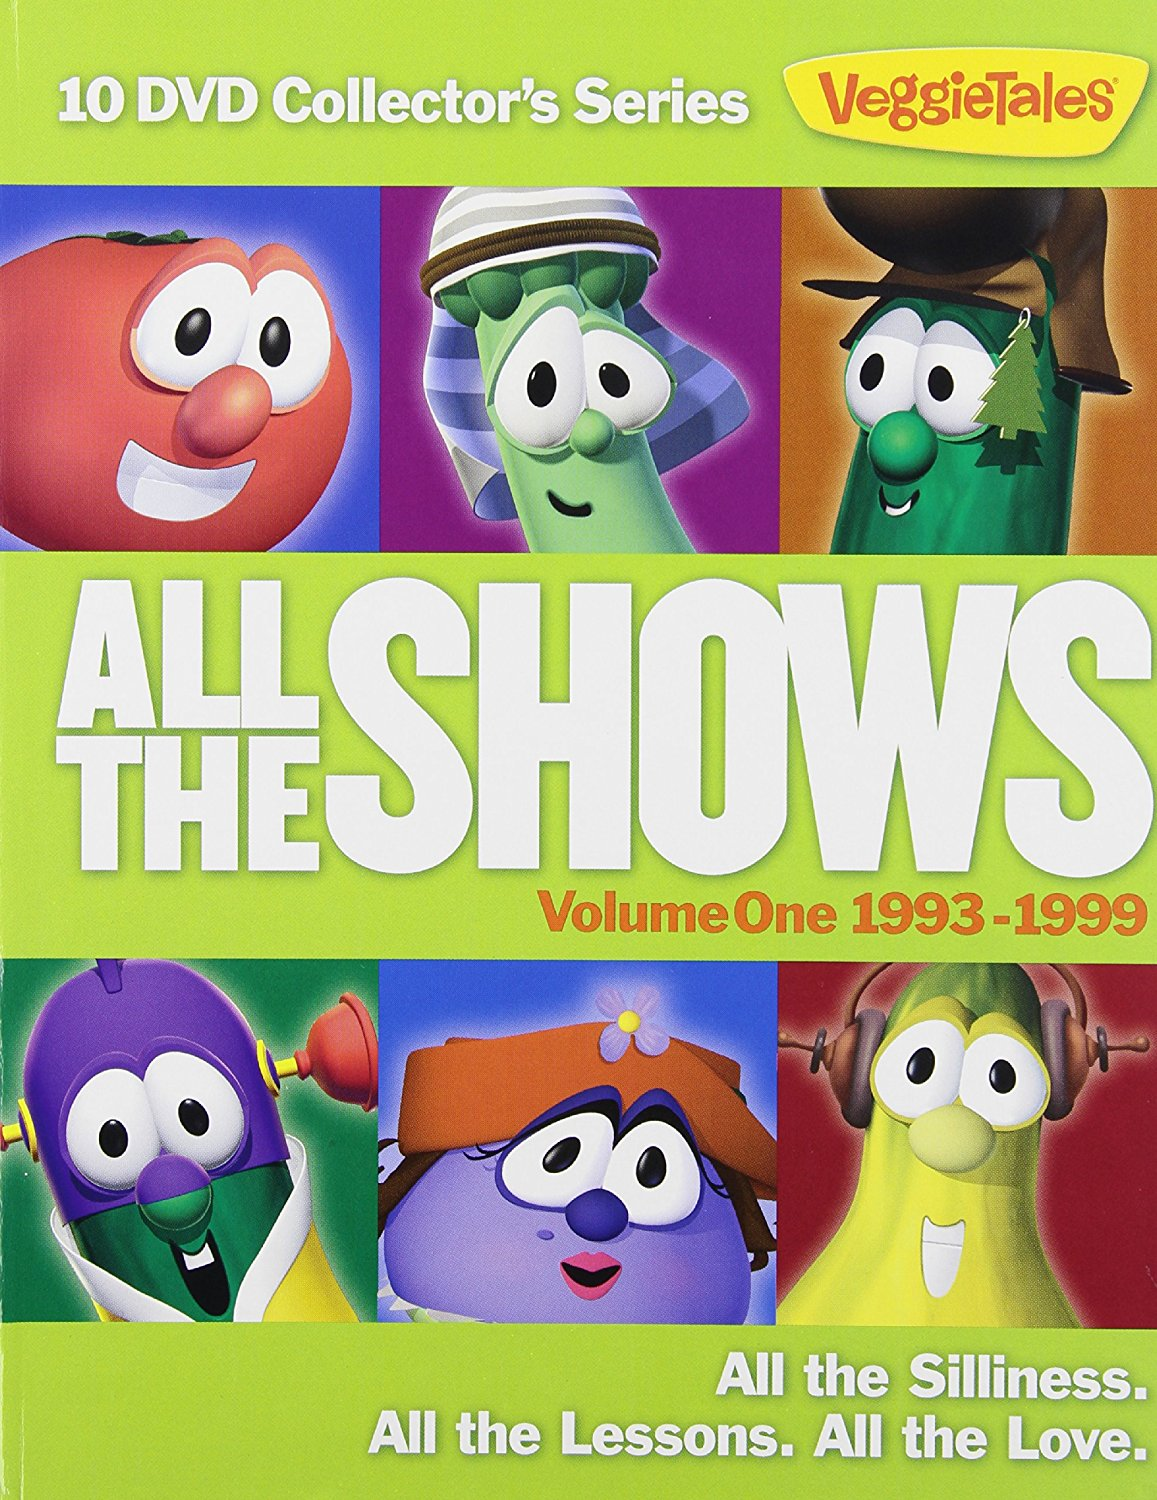 All the Shows Vol. 1 (1993-1999) is the first compilation DVD release in th...